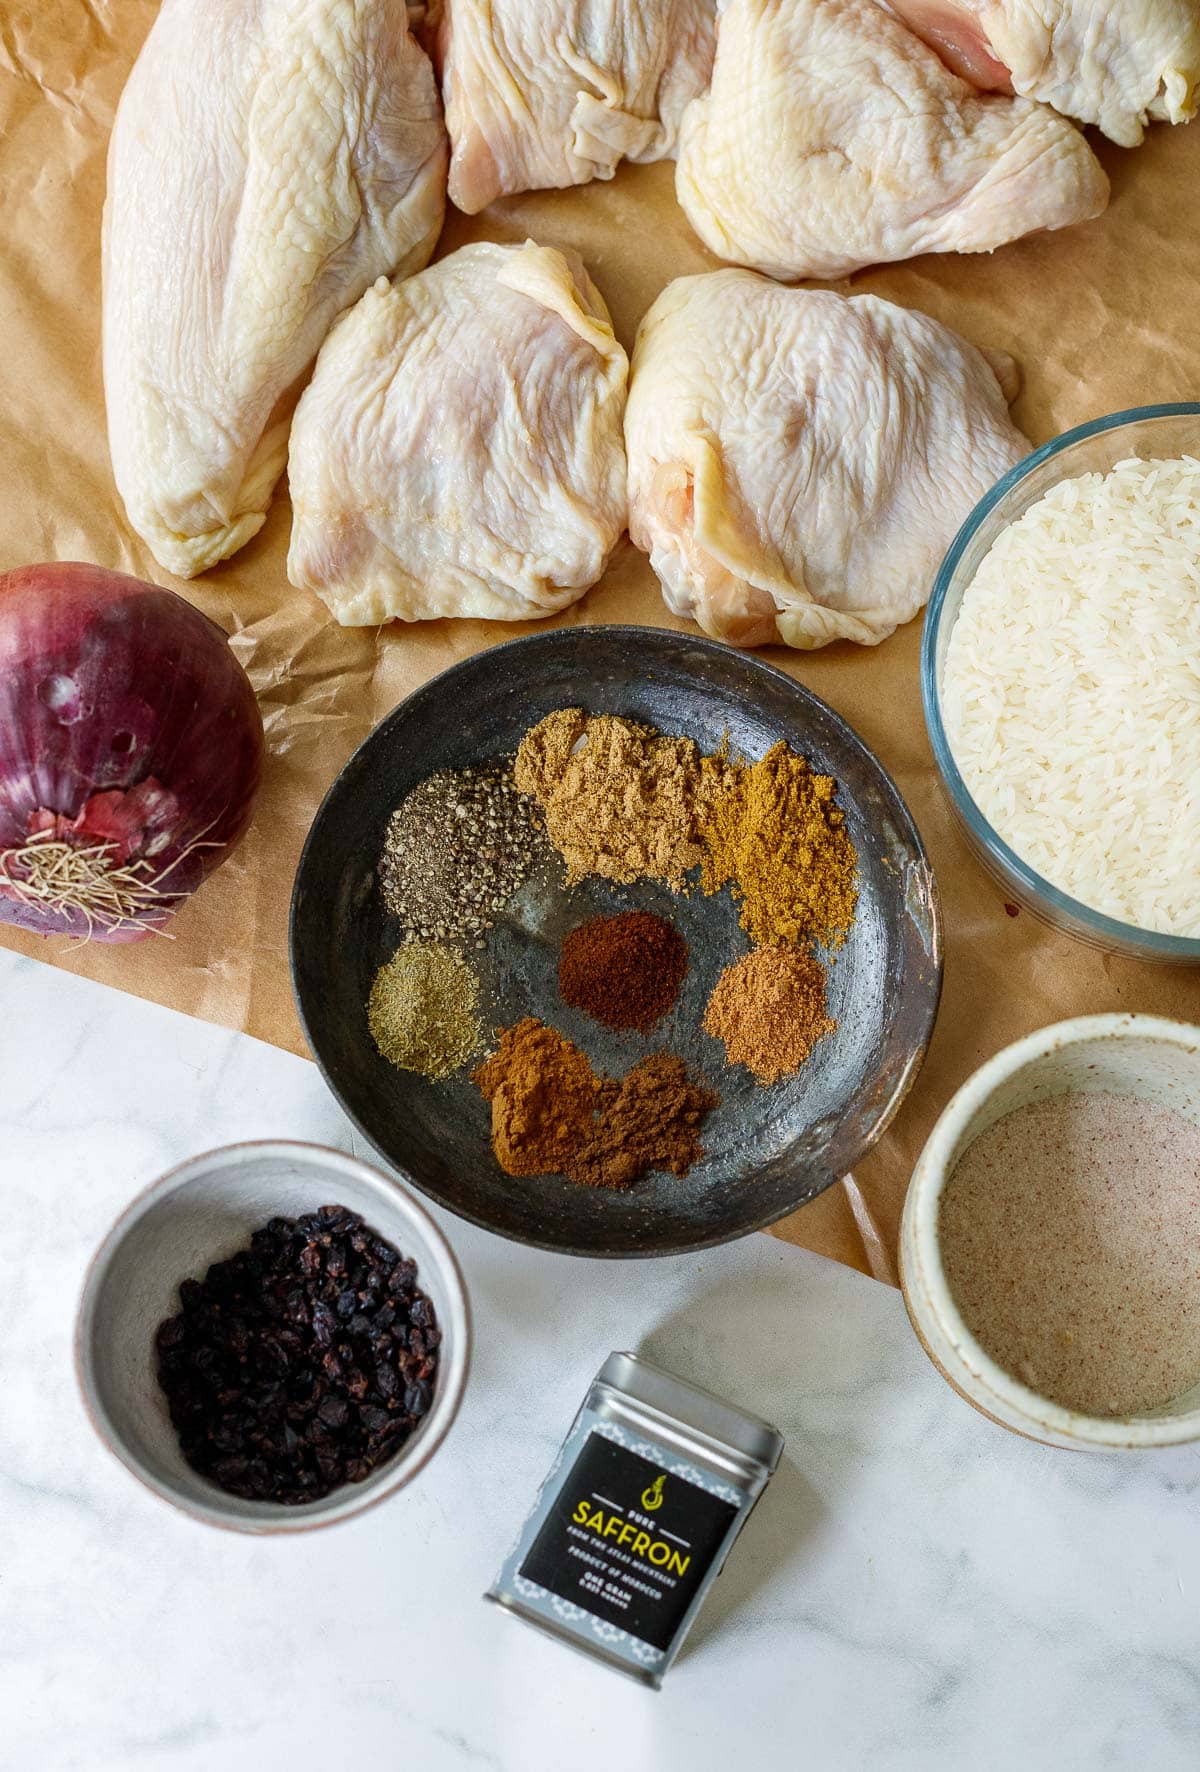 ingredients for persian chicken on parchment paper - chicken, rice, spices, onion, salt, barberries